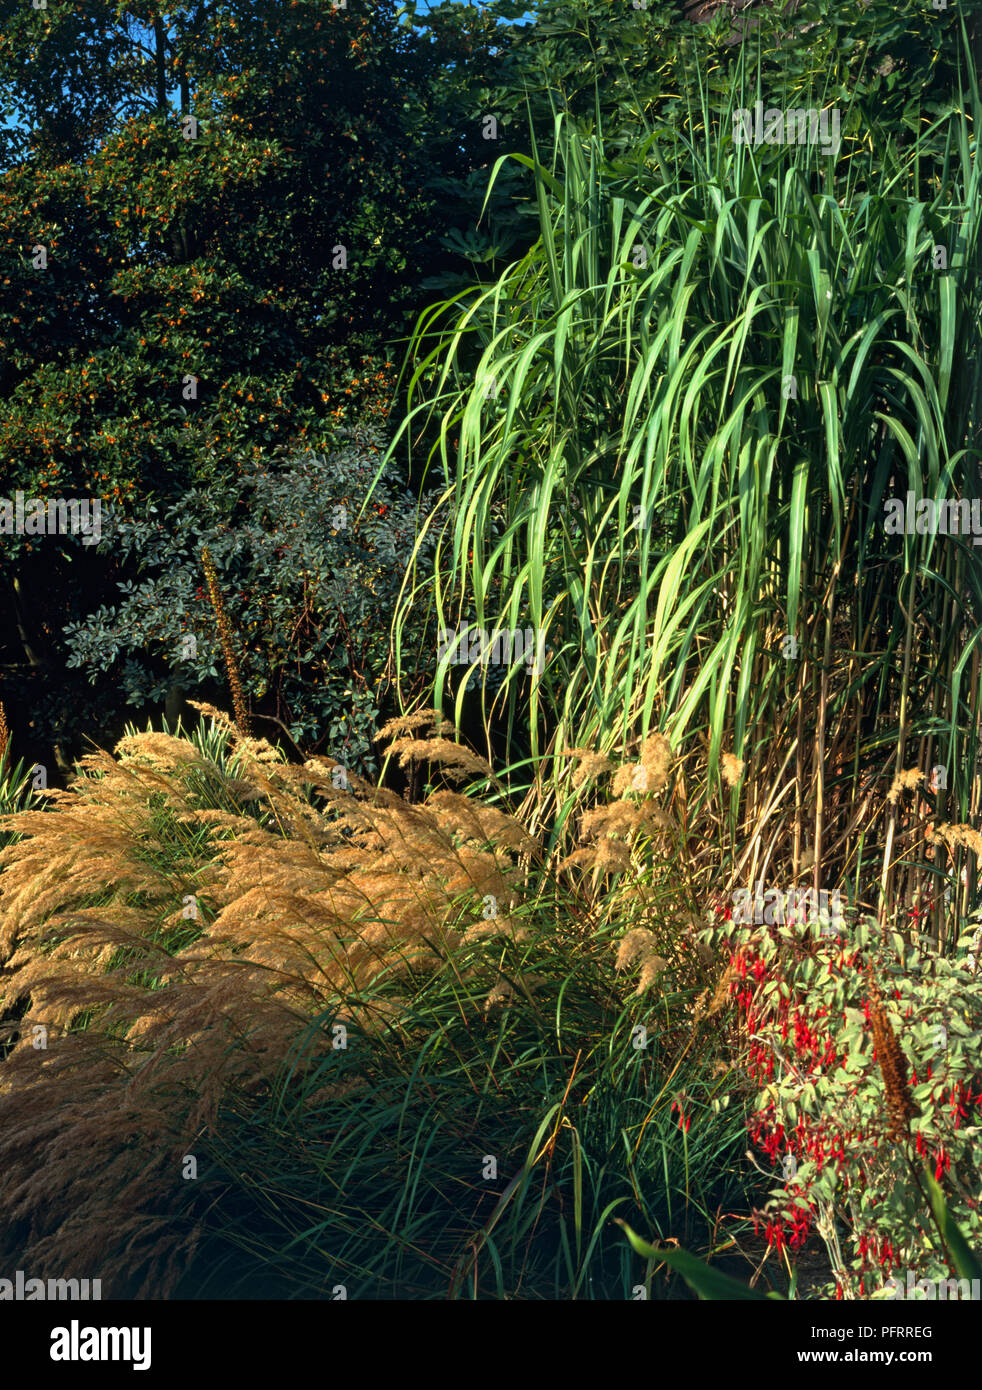 Perennial border of grasses, Miscanthus sinensis (Japanese silver grass) and Pennisetum sp., and flowers from Fuchsia sp. Stock Photo